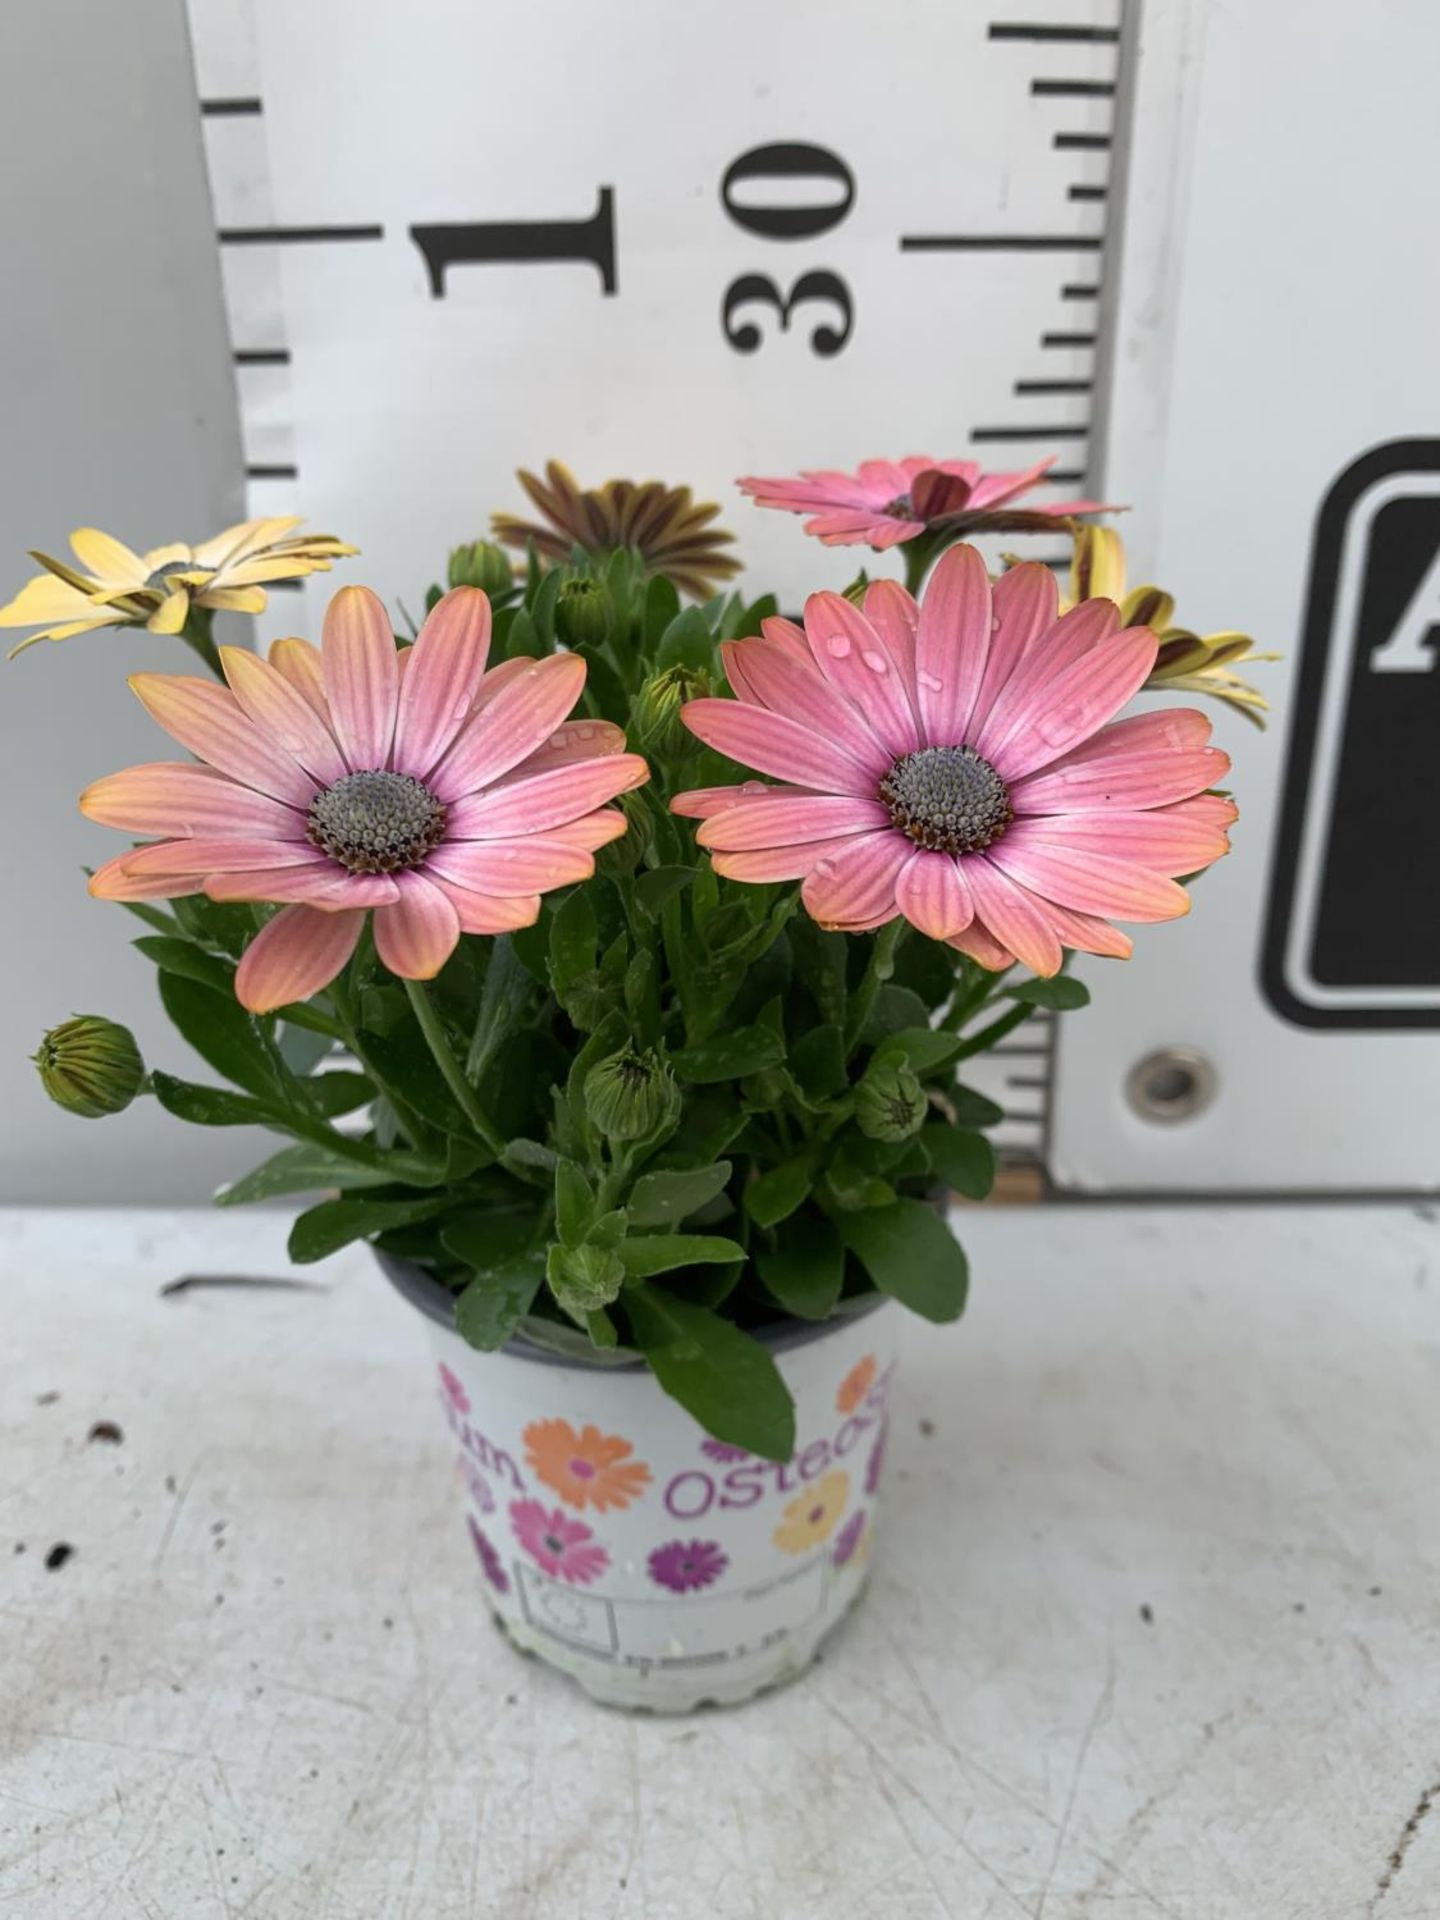 TWELVE MIXED COLOURED OSTEOSPERMUM PLANTS ON A TRAY TO BE SOLD FOR THE TWELVE PLUS VAT - Image 3 of 5